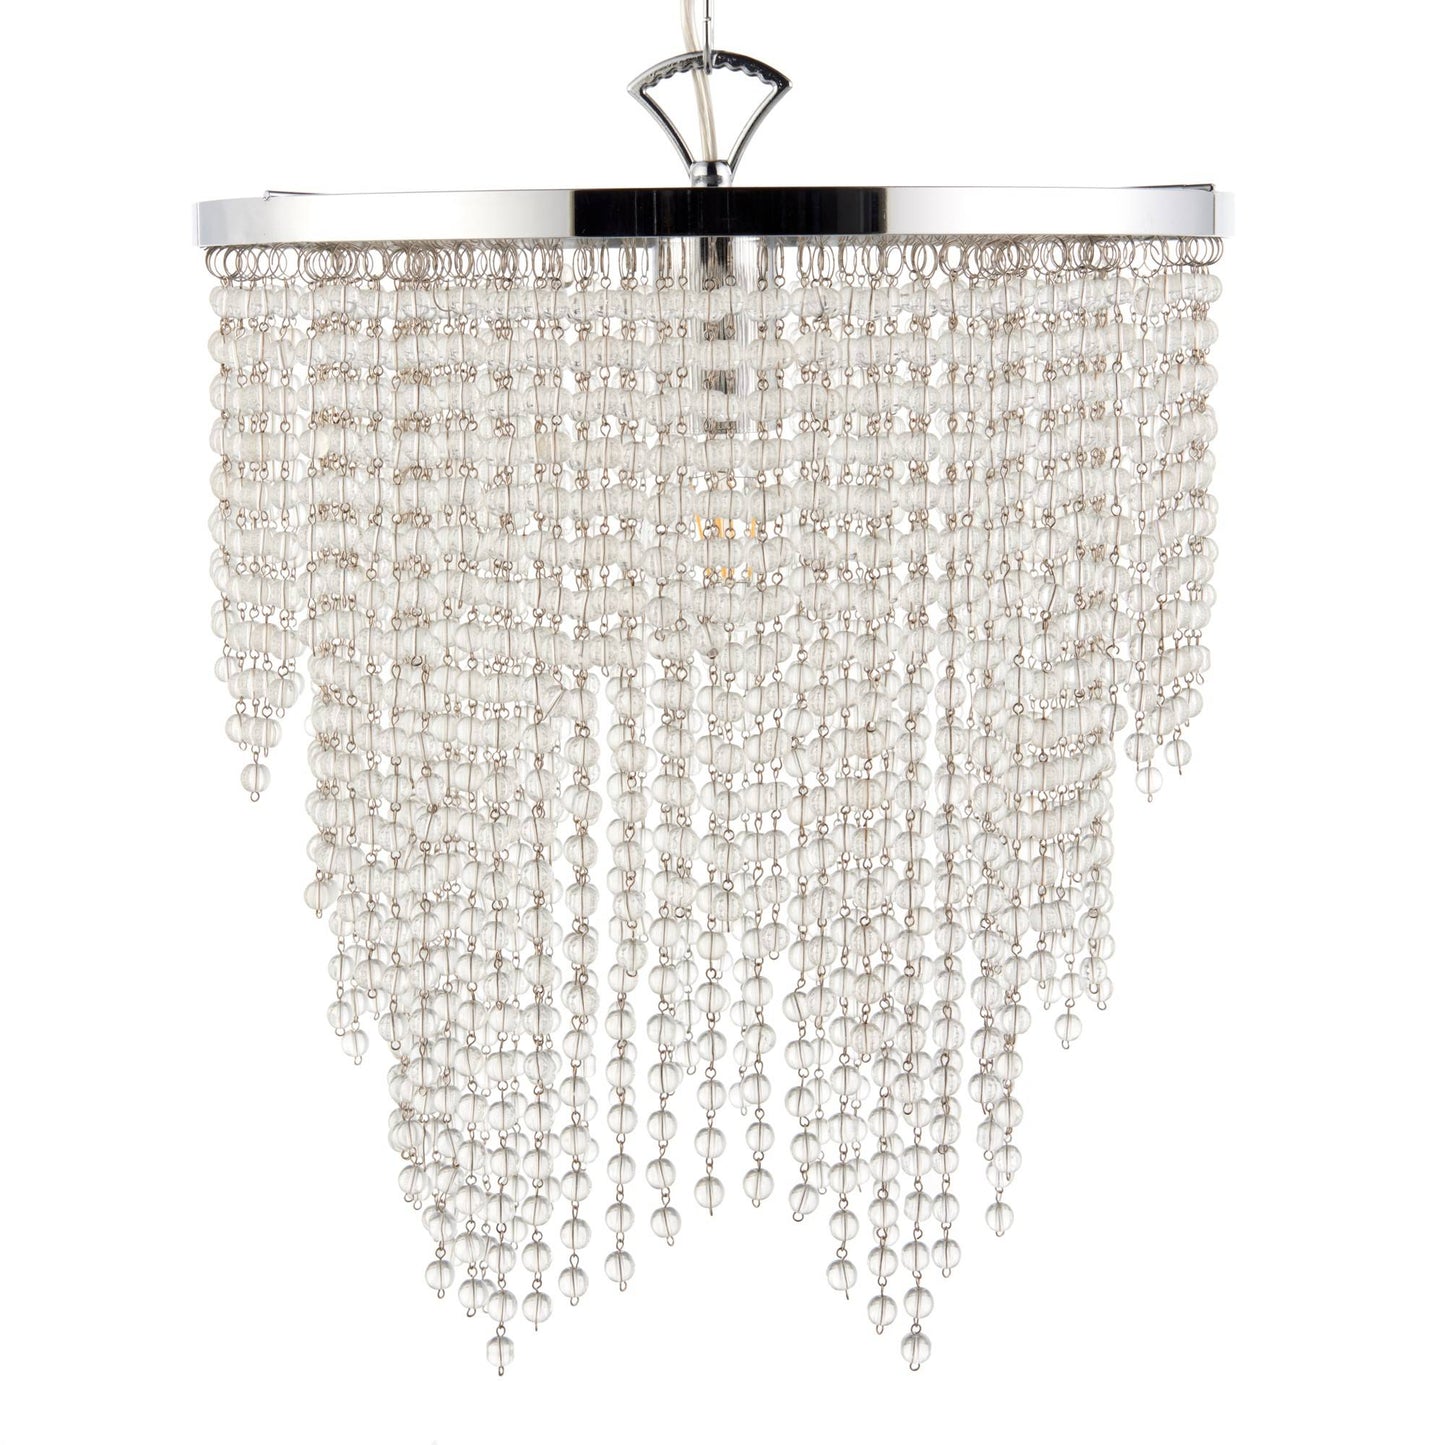 Rain 1 Light Polished Chrome Pendant Ceiling Light with Clear Glass Droplets